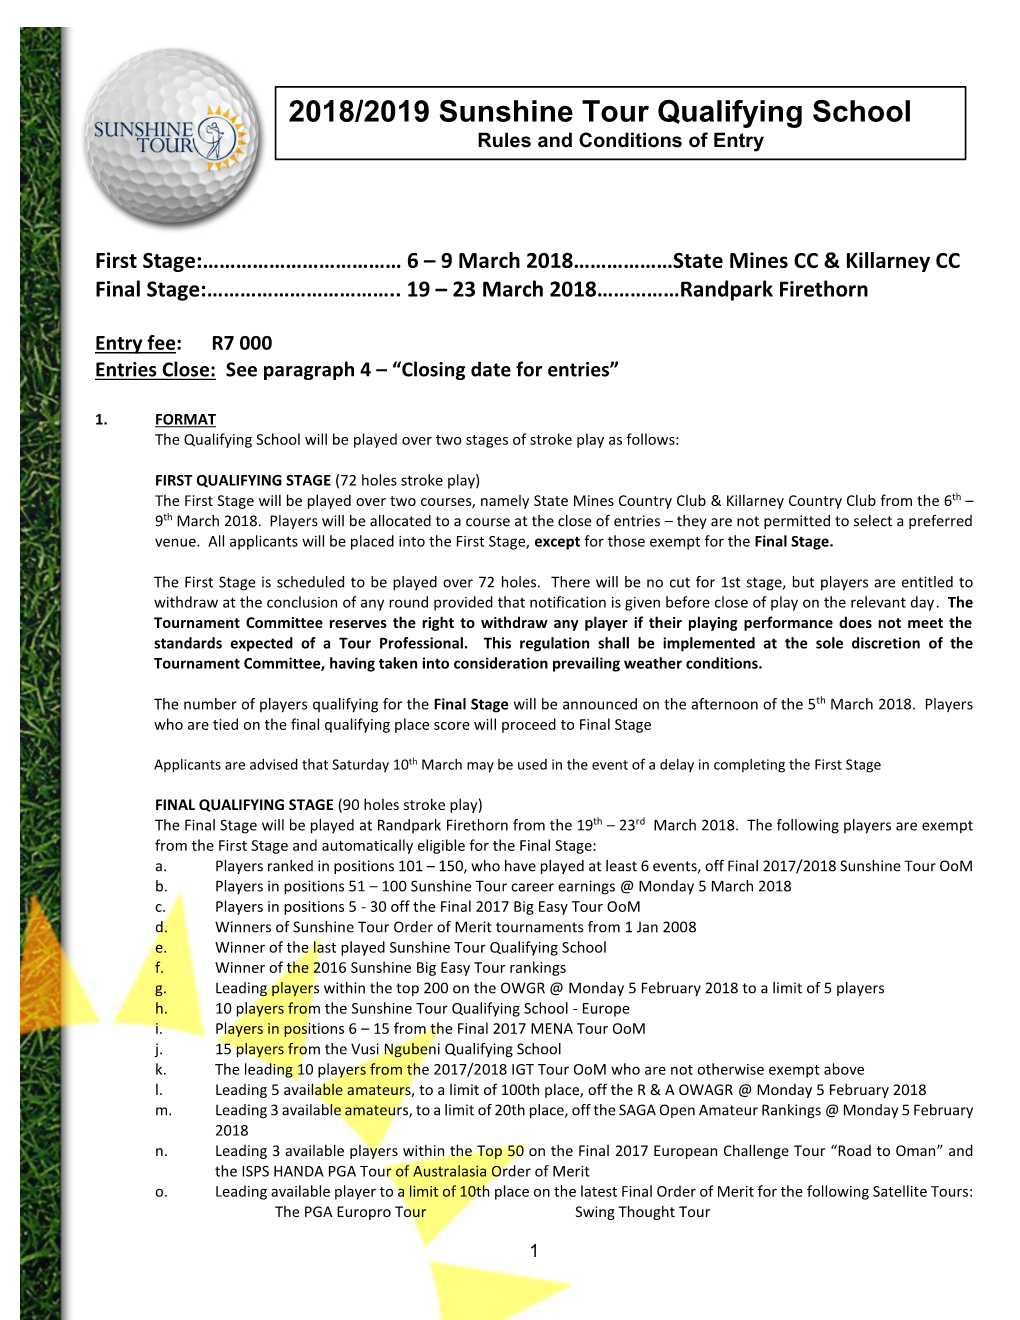 2018/2019 Sunshine Tour Qualifying School Rules and Conditions of Entry